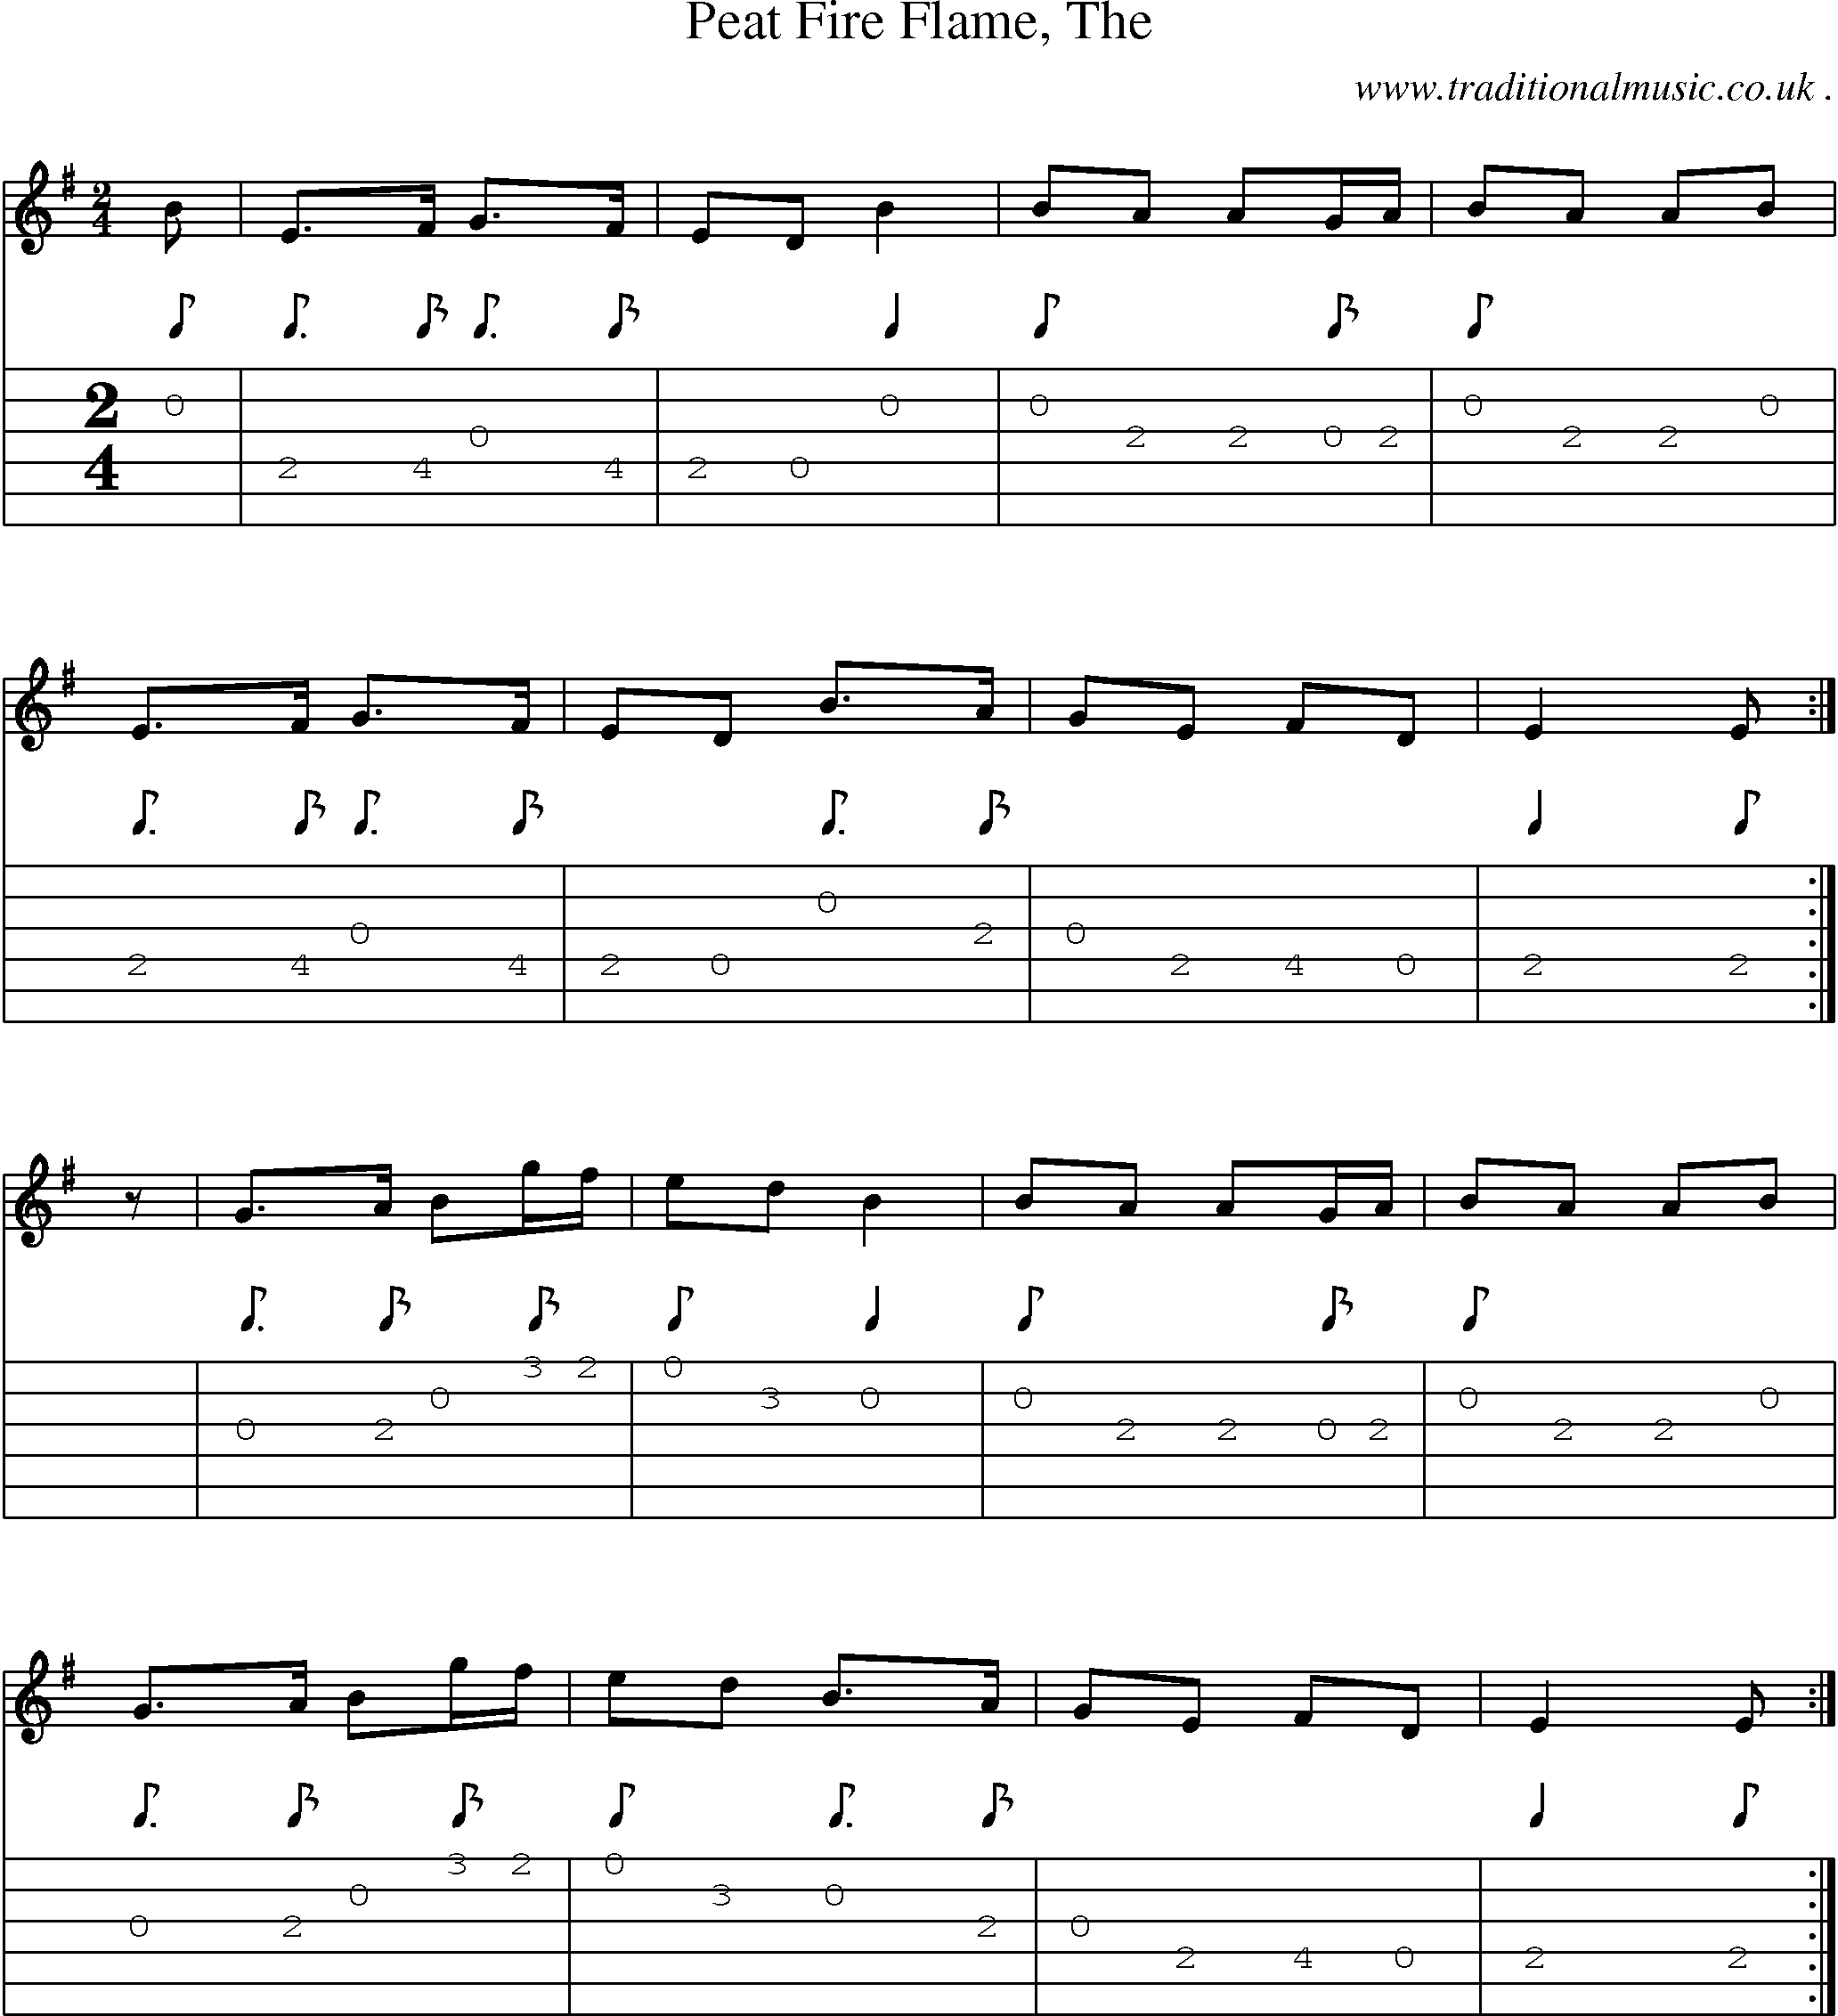 Sheet-music  score, Chords and Guitar Tabs for Peat Fire Flame The